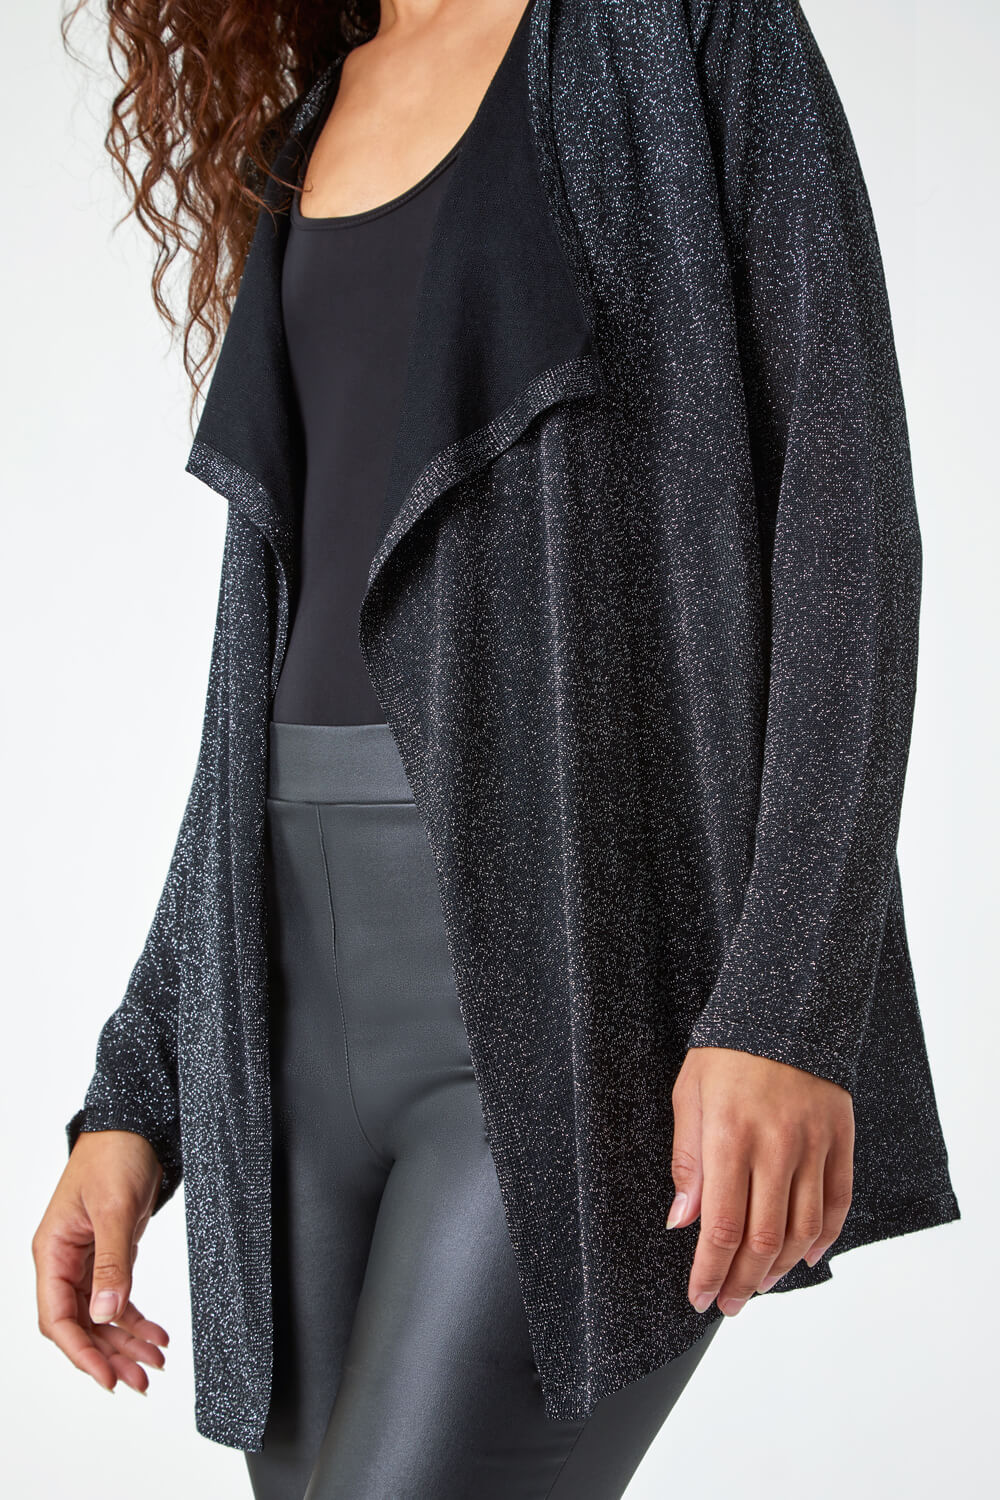 Black Shimmer Waterfall Stretch Cardigan, Image 5 of 5